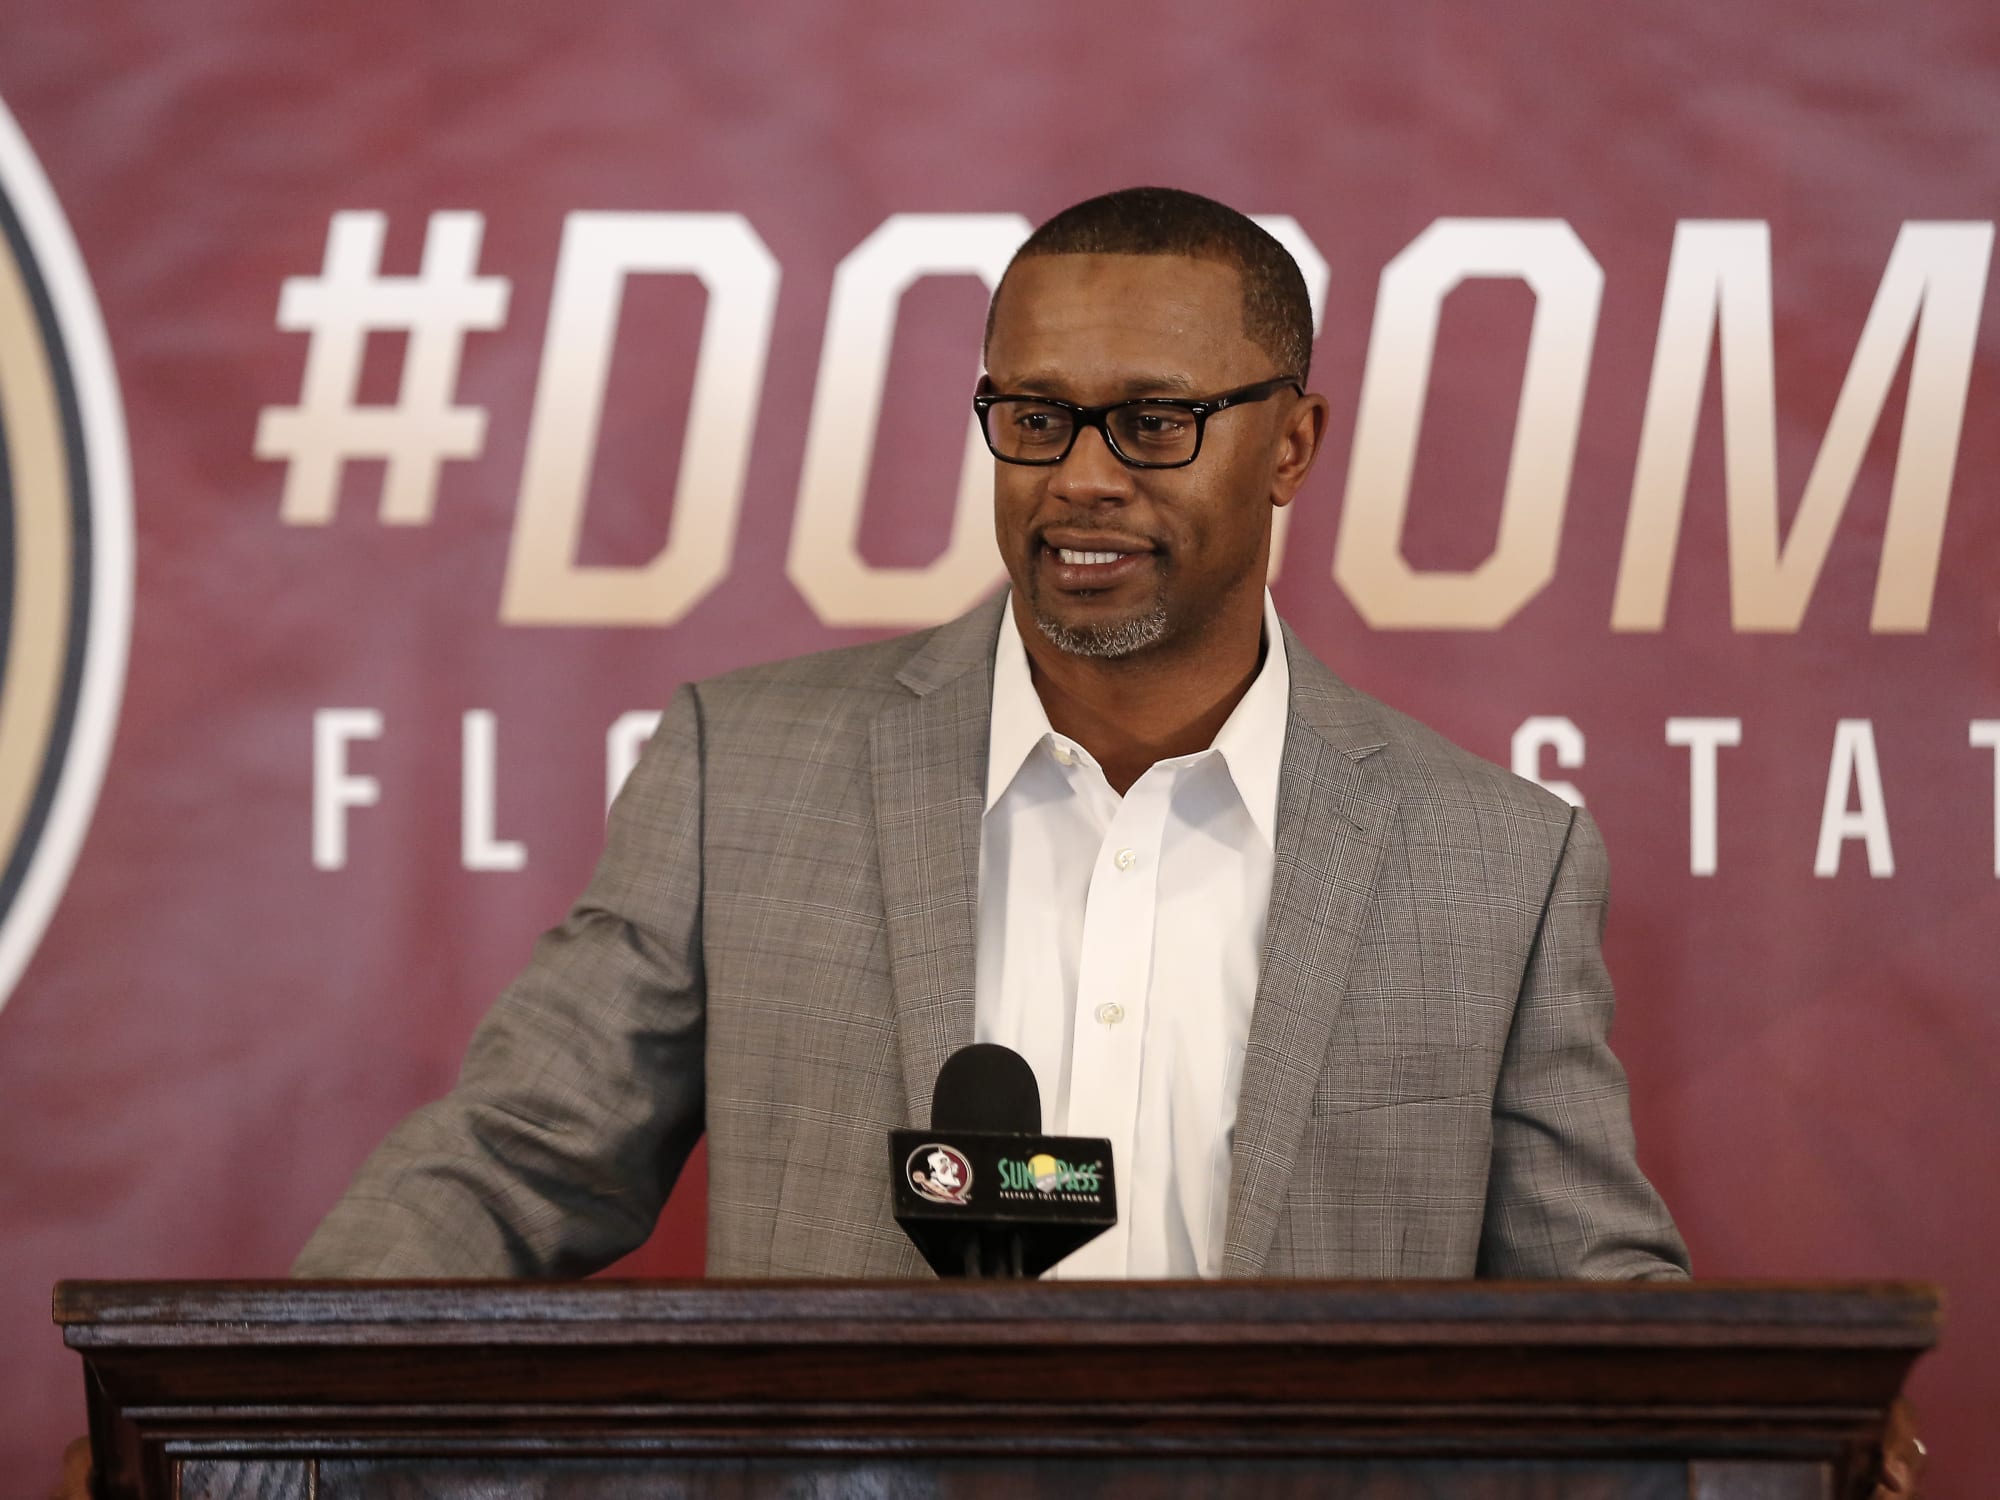 Florida State Willie Taggart Set Up For Short And Long Term Success